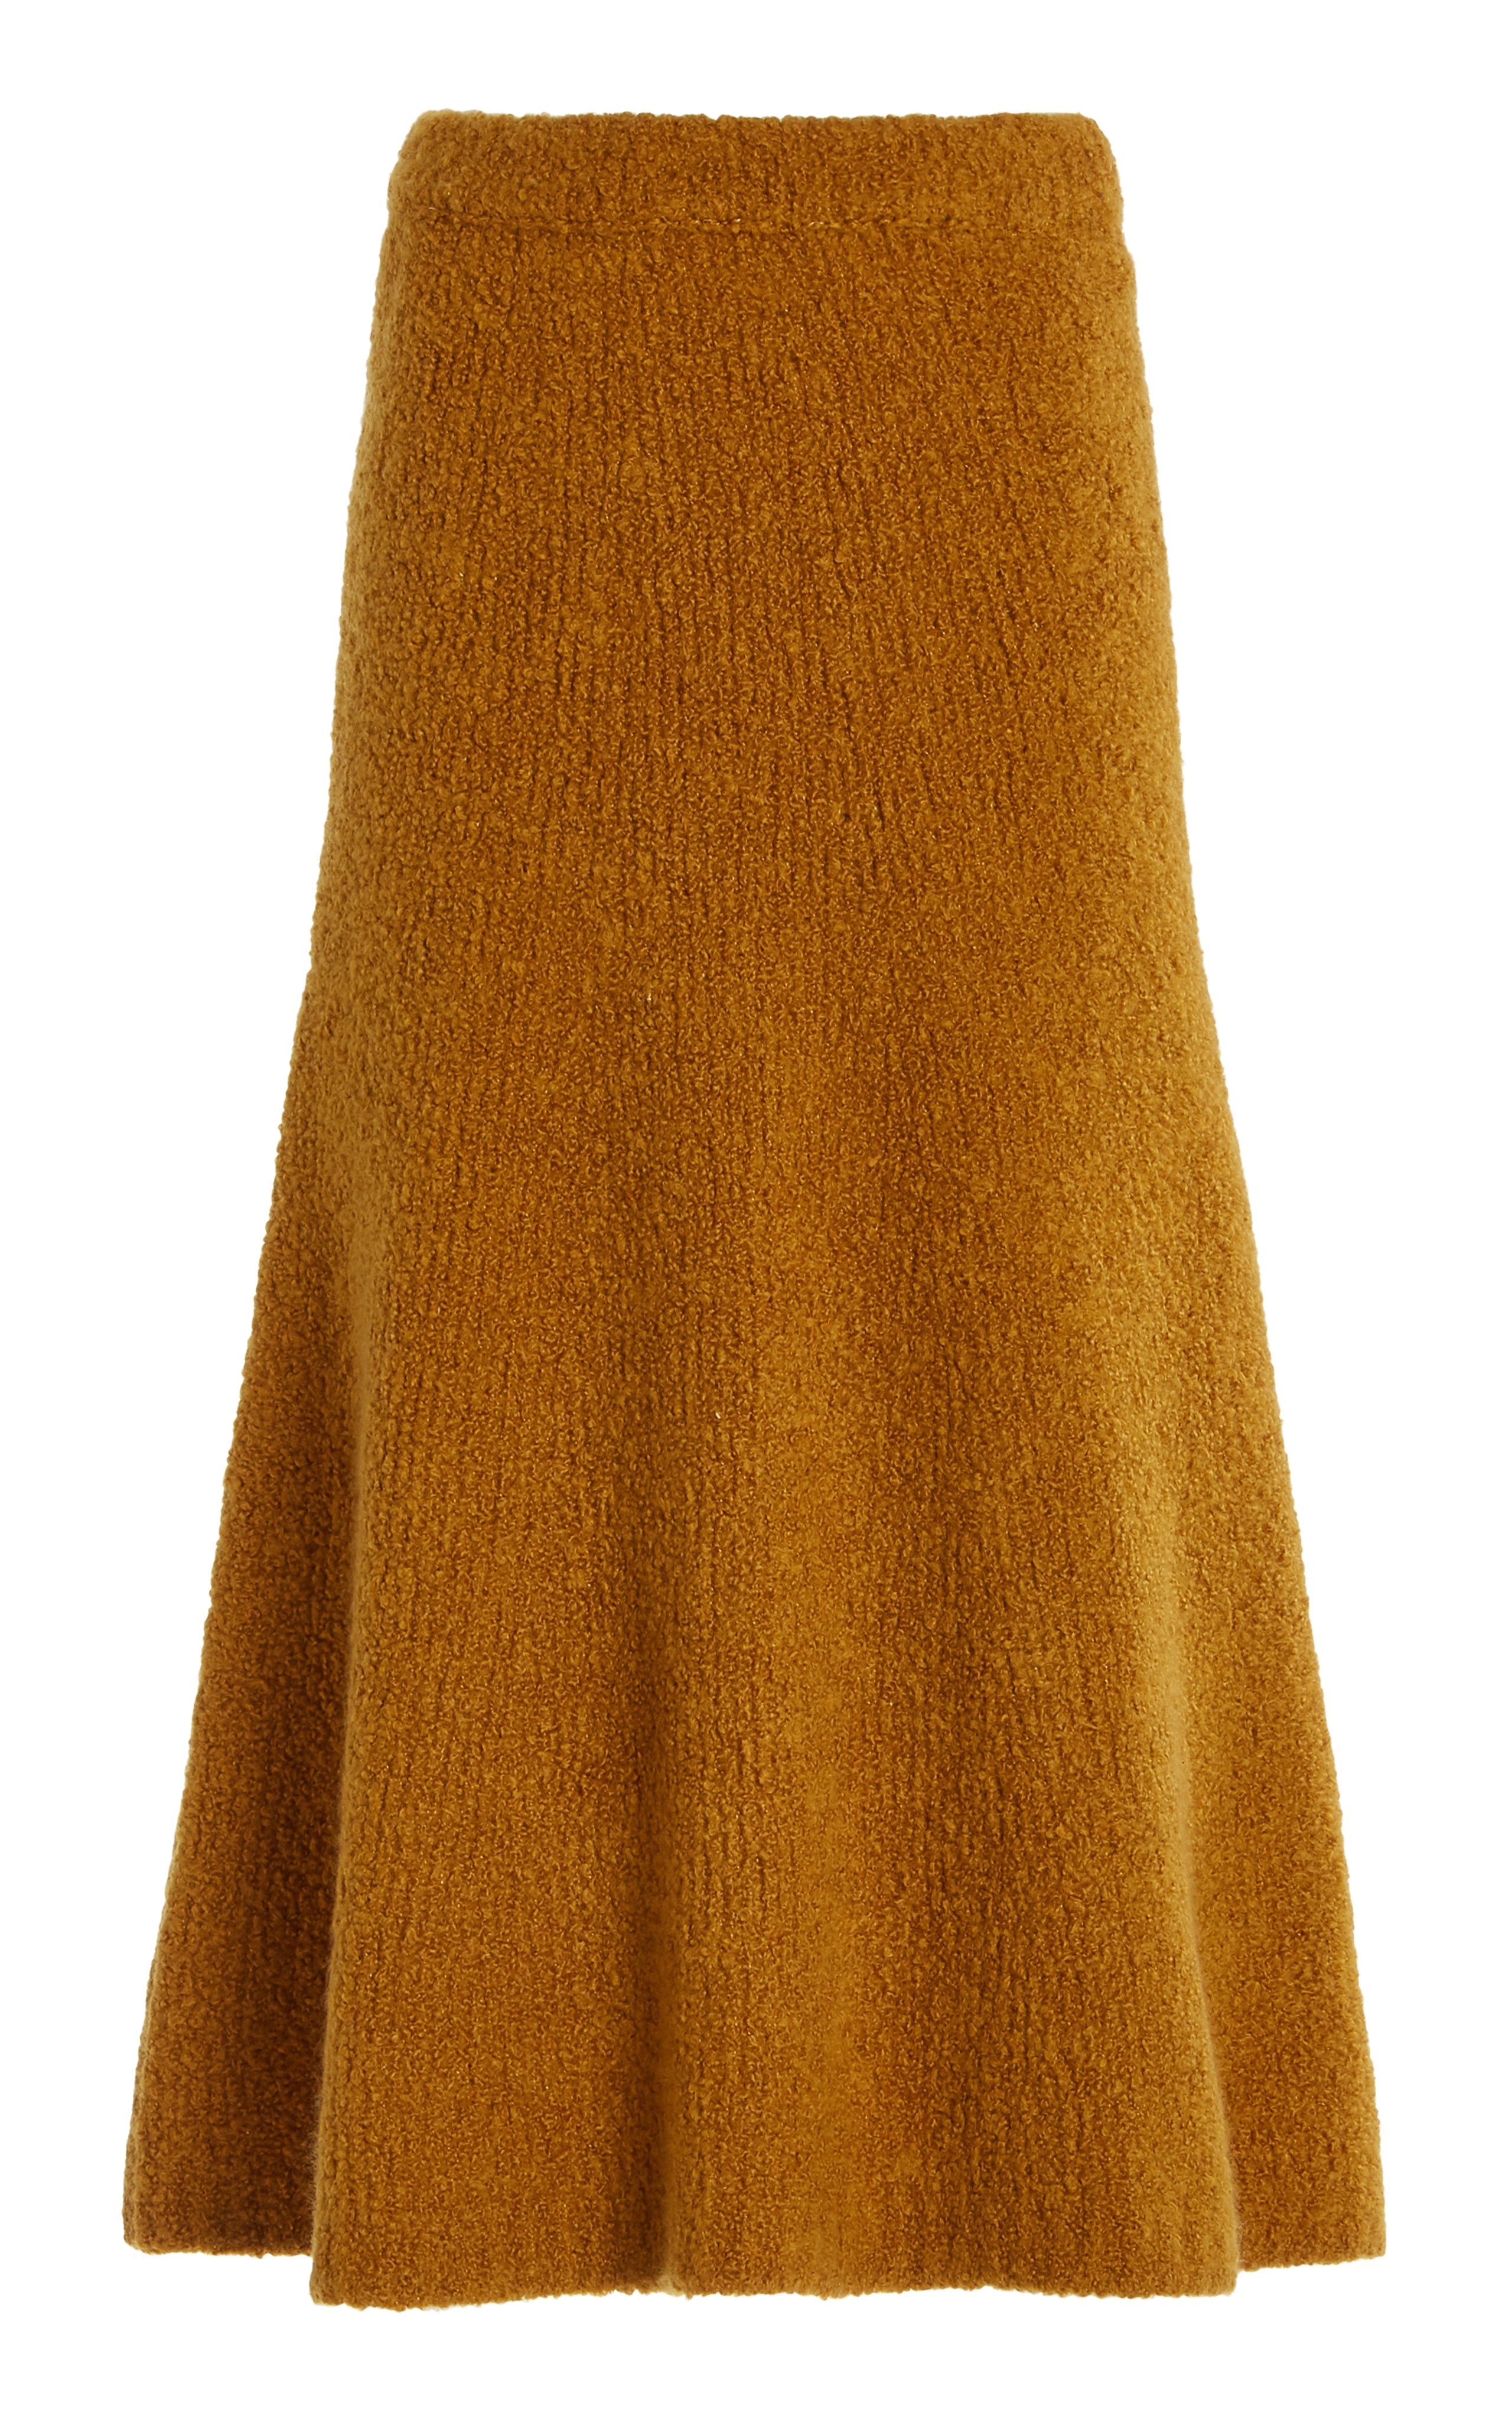 Pablo Skirt in Cashmere Boucle - 1